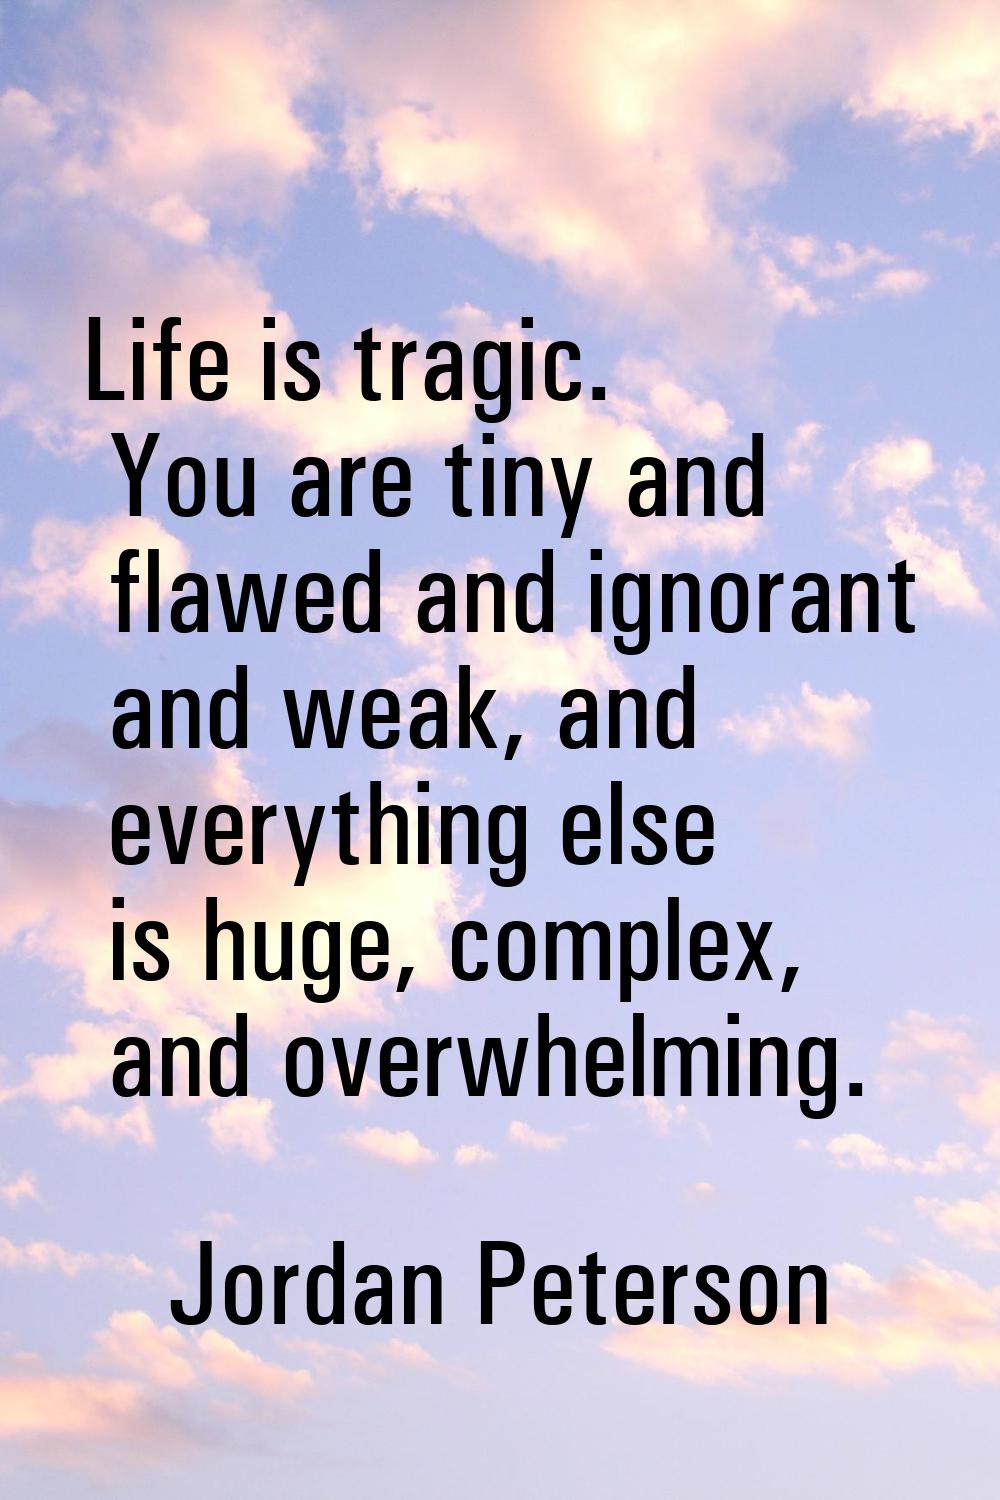 Life is tragic. You are tiny and flawed and ignorant and weak, and everything else is huge, complex